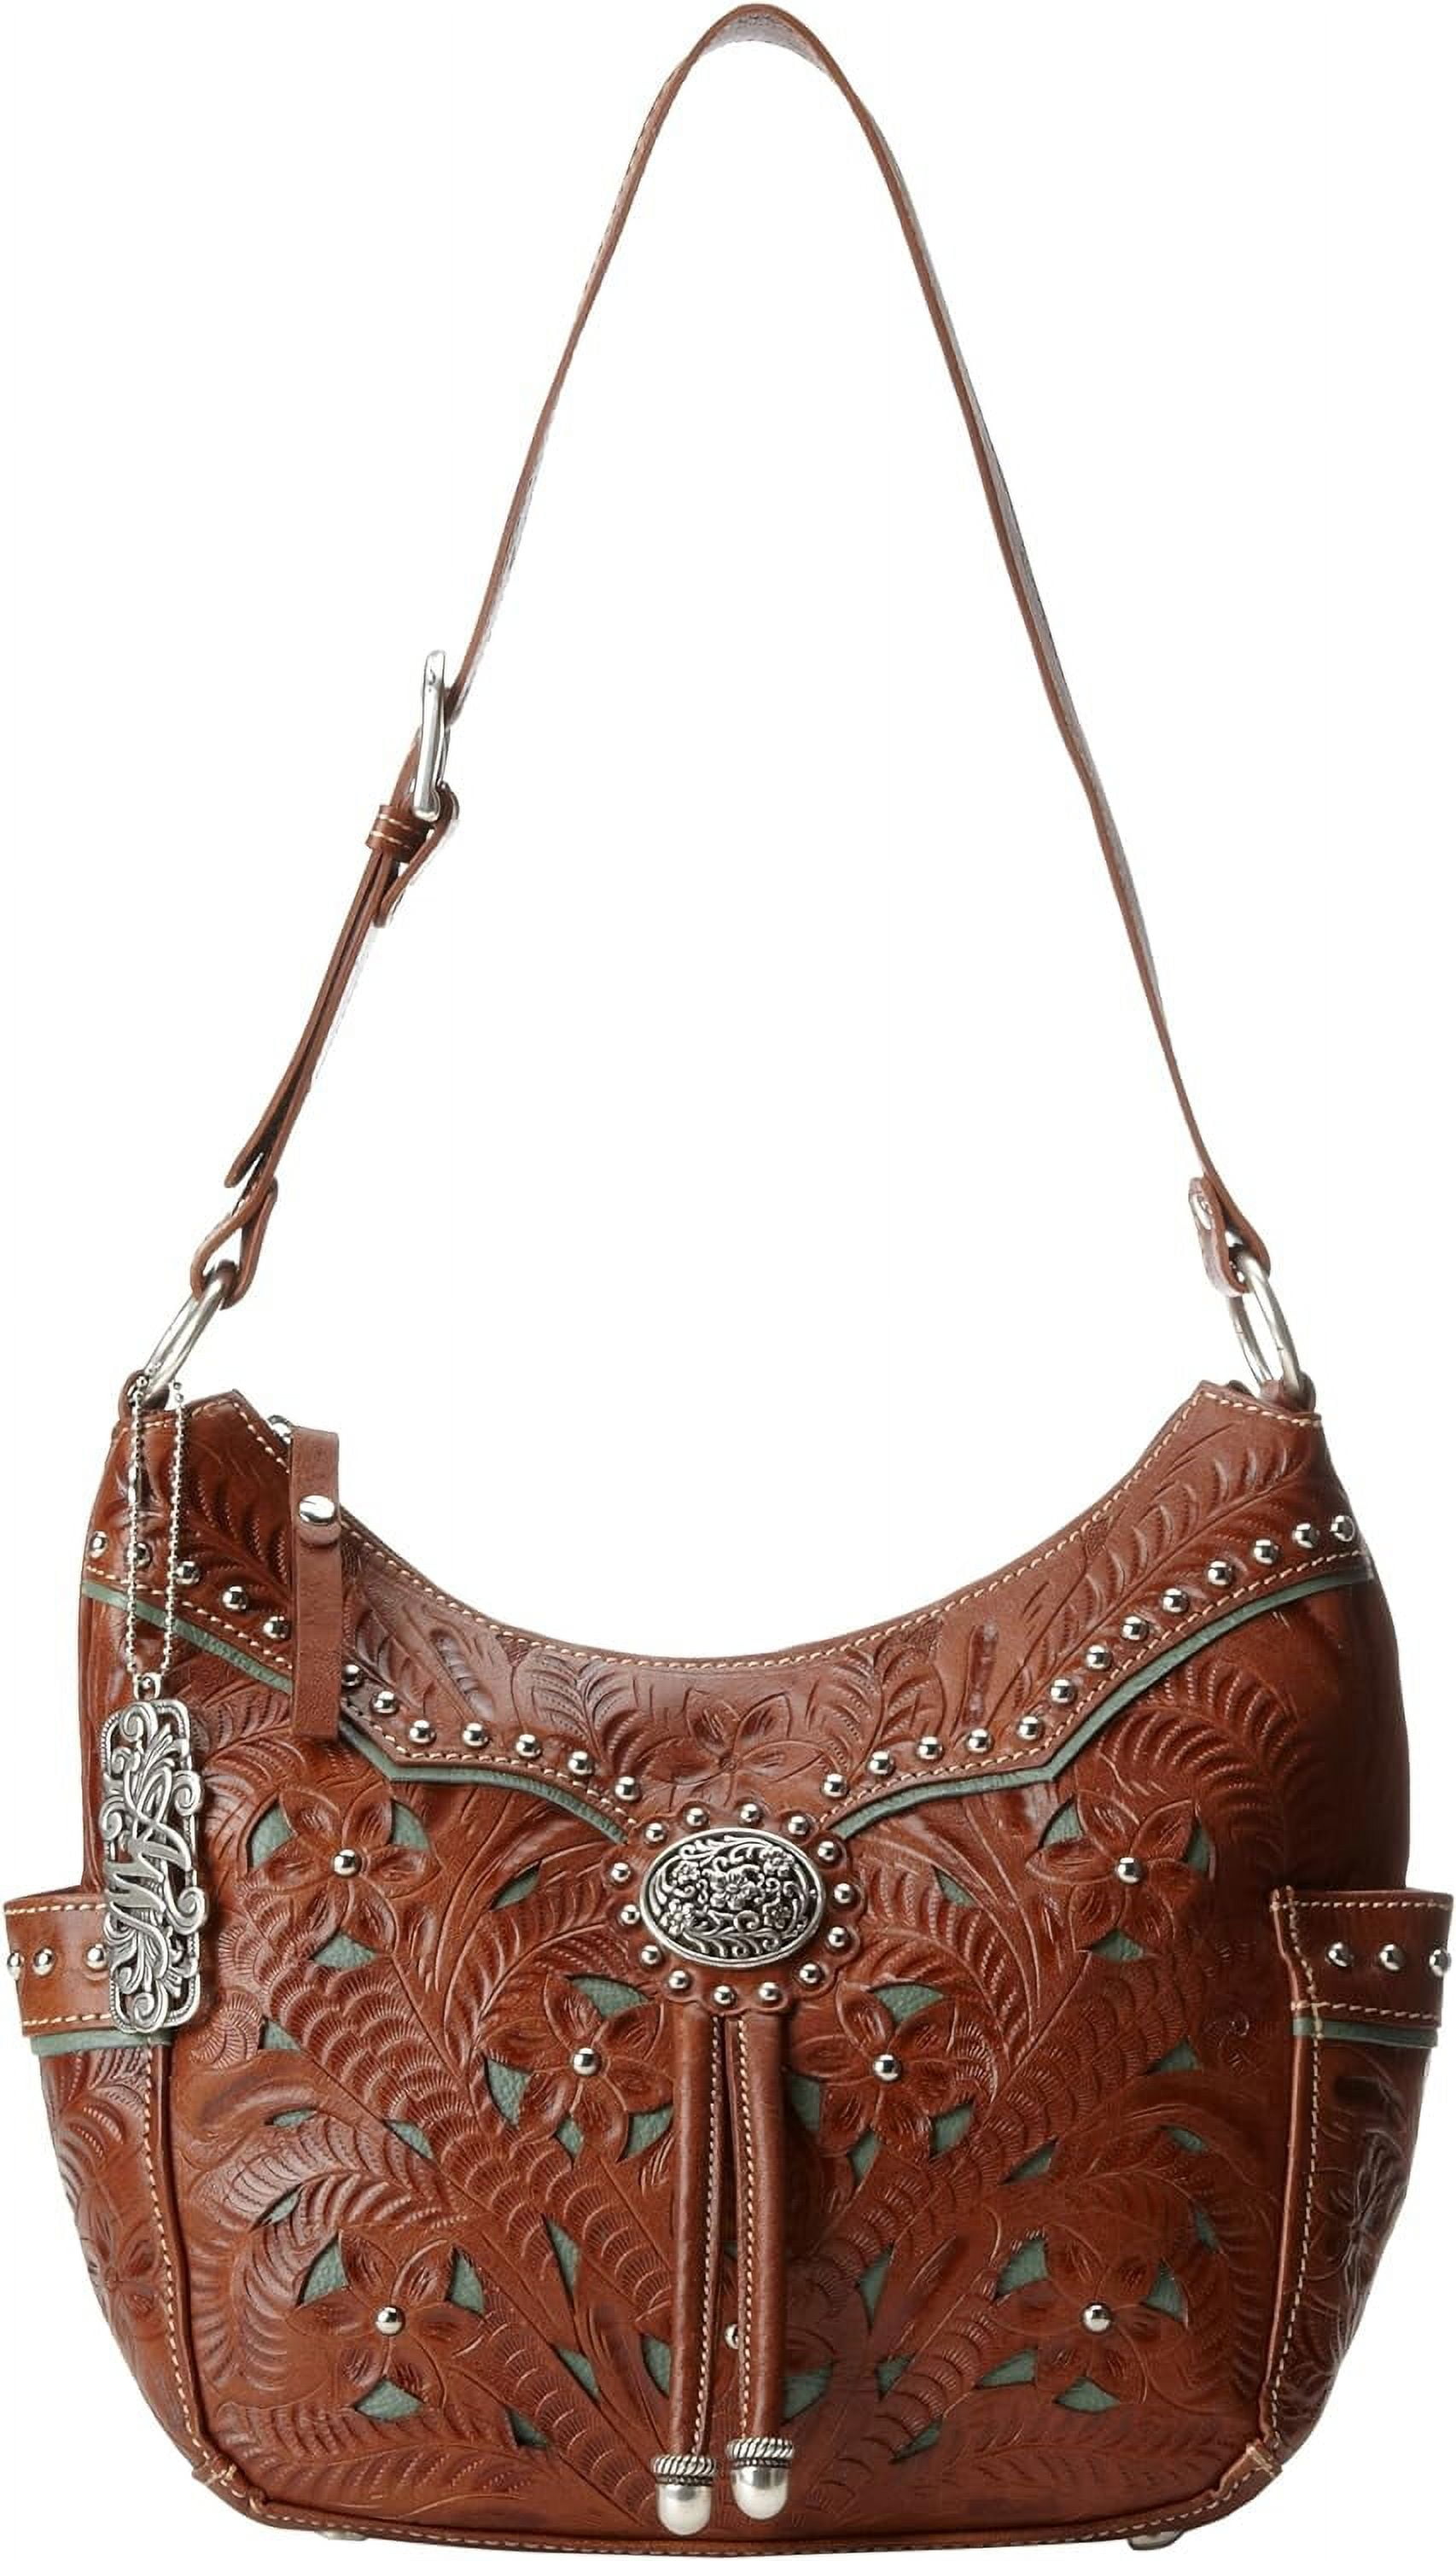 American West Womens Western Floral Tooled Leather Medium Tote Shoulder  Purse | eBay